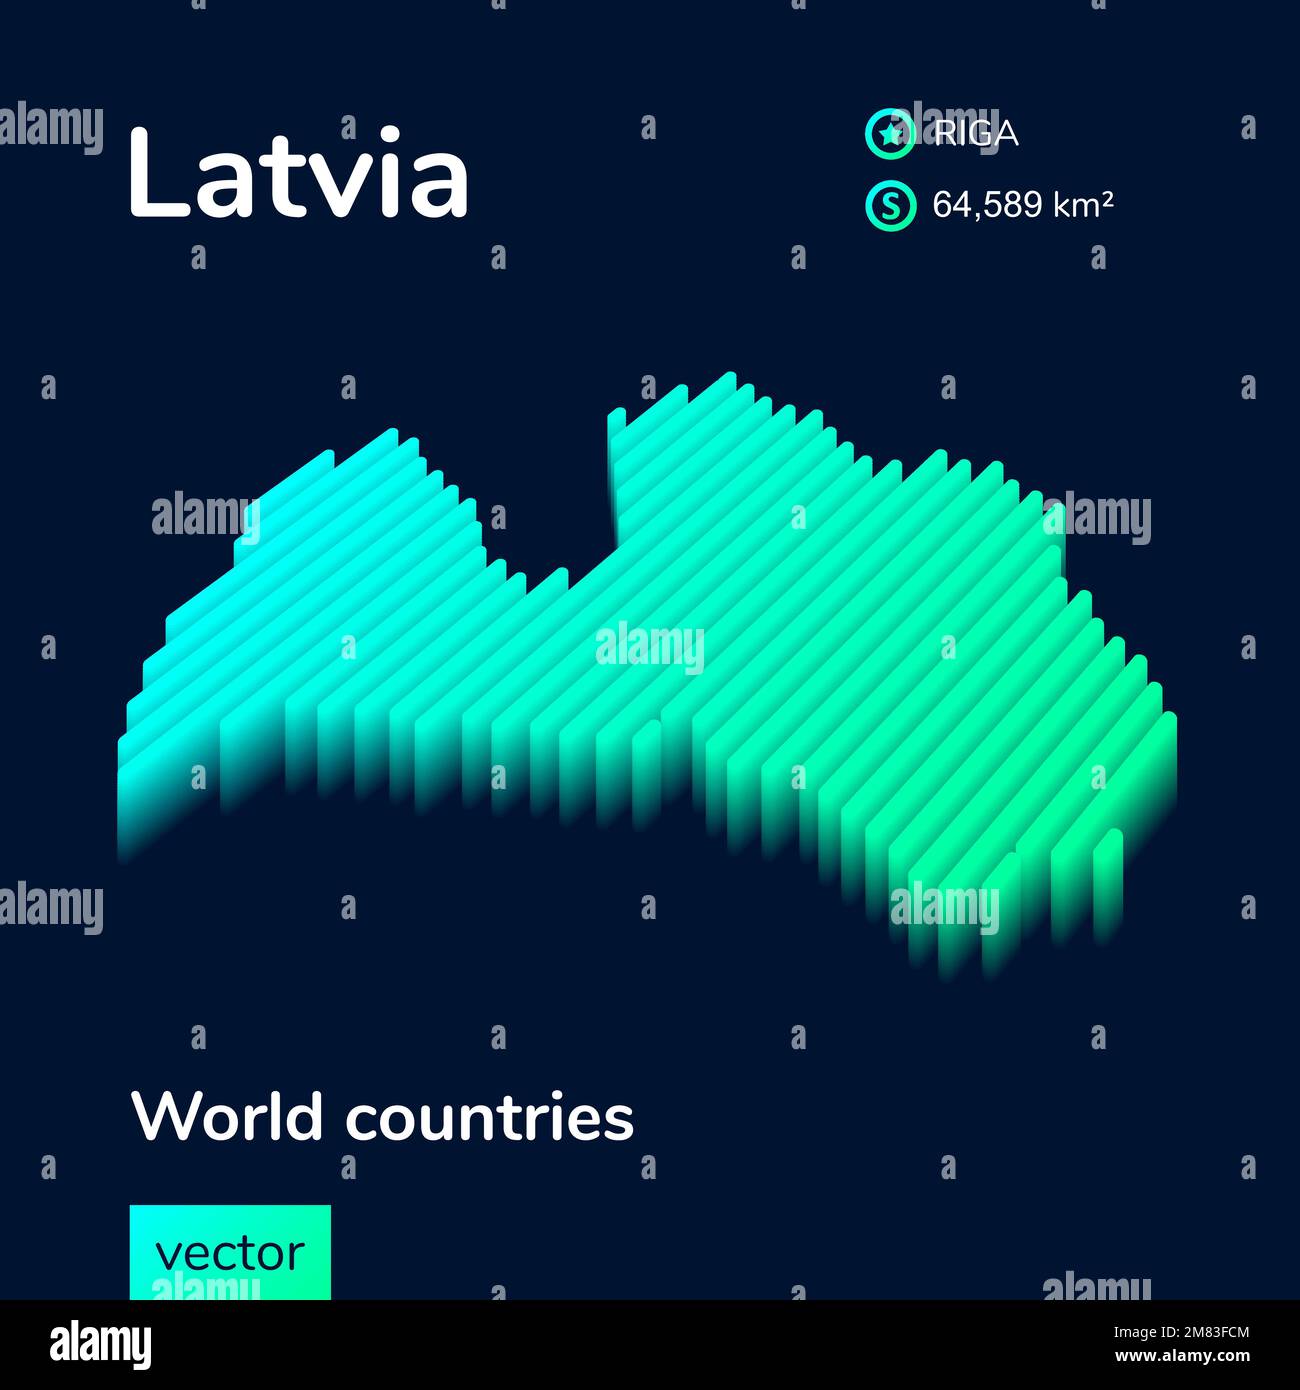 3d vector neon isometric Latvia map in turquoise colors on a dark blue background. Stylized map icon of Latvia. Infographic element Stock Vector